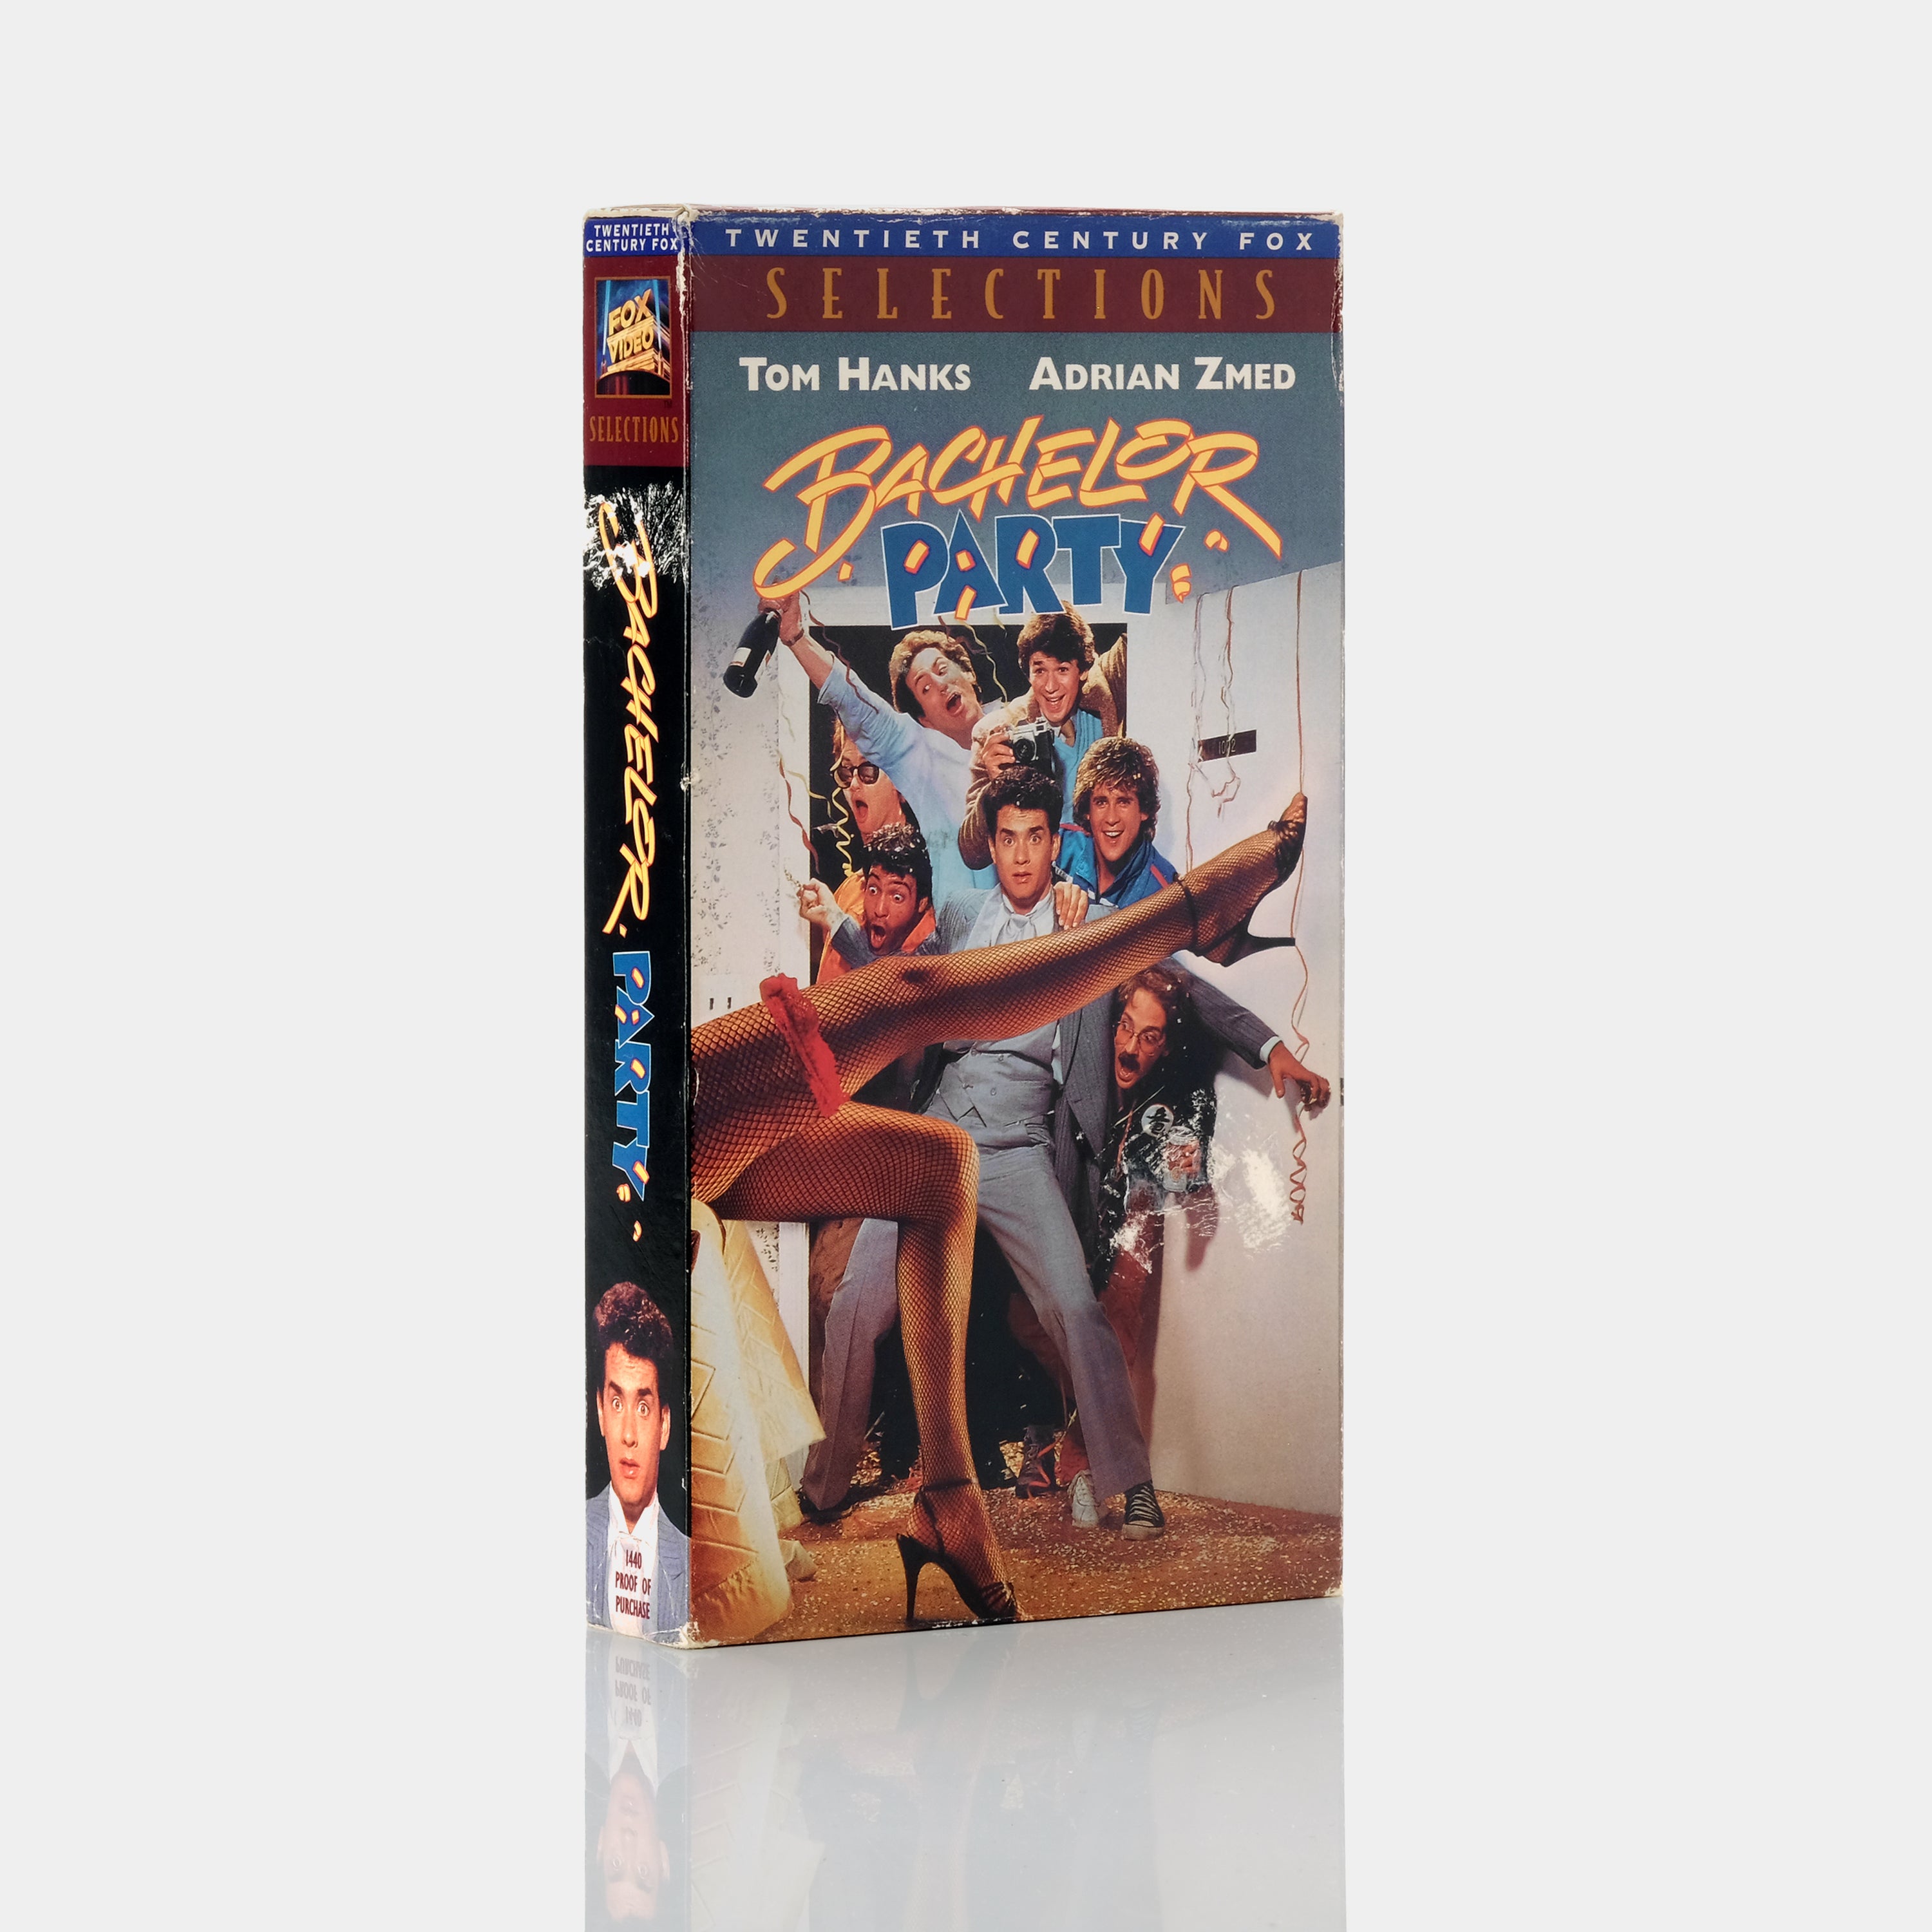 Bachelor Party VHS Tape